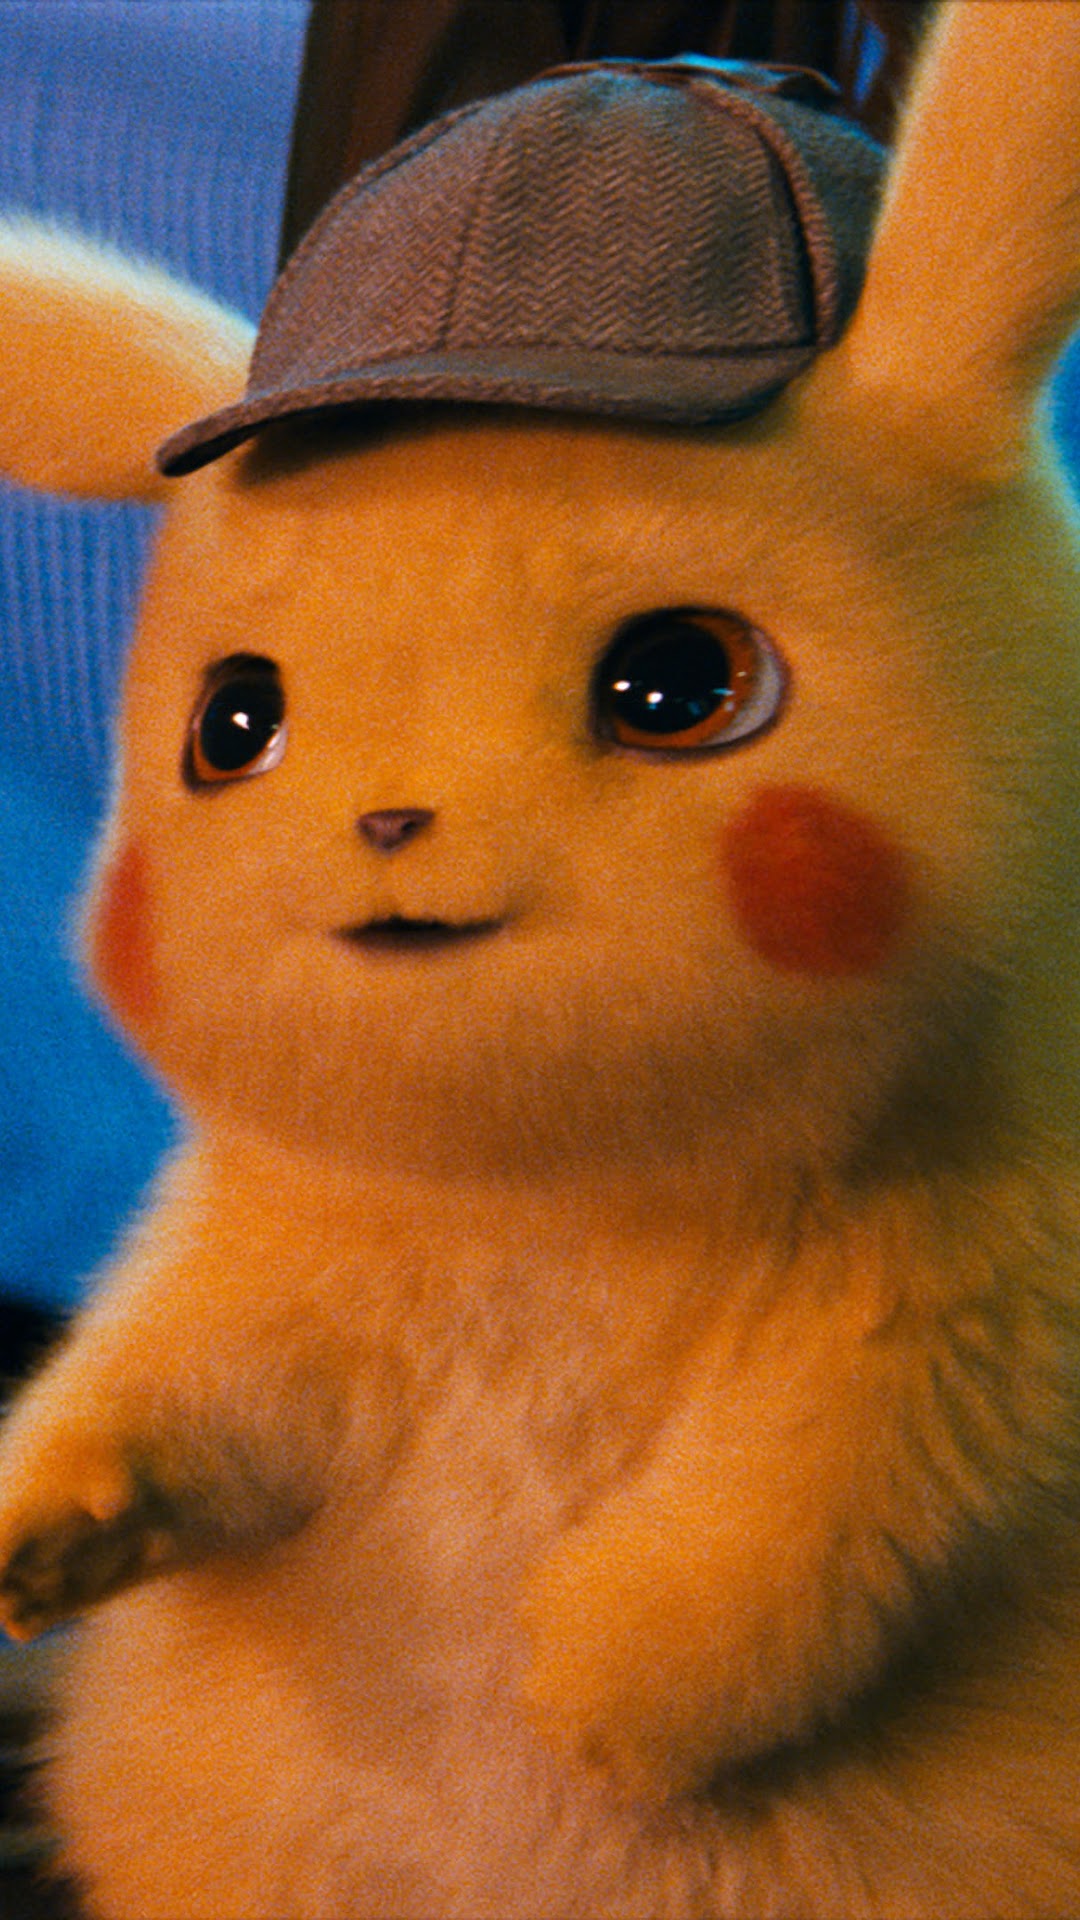 Pikachu Wallpaper For iPhone